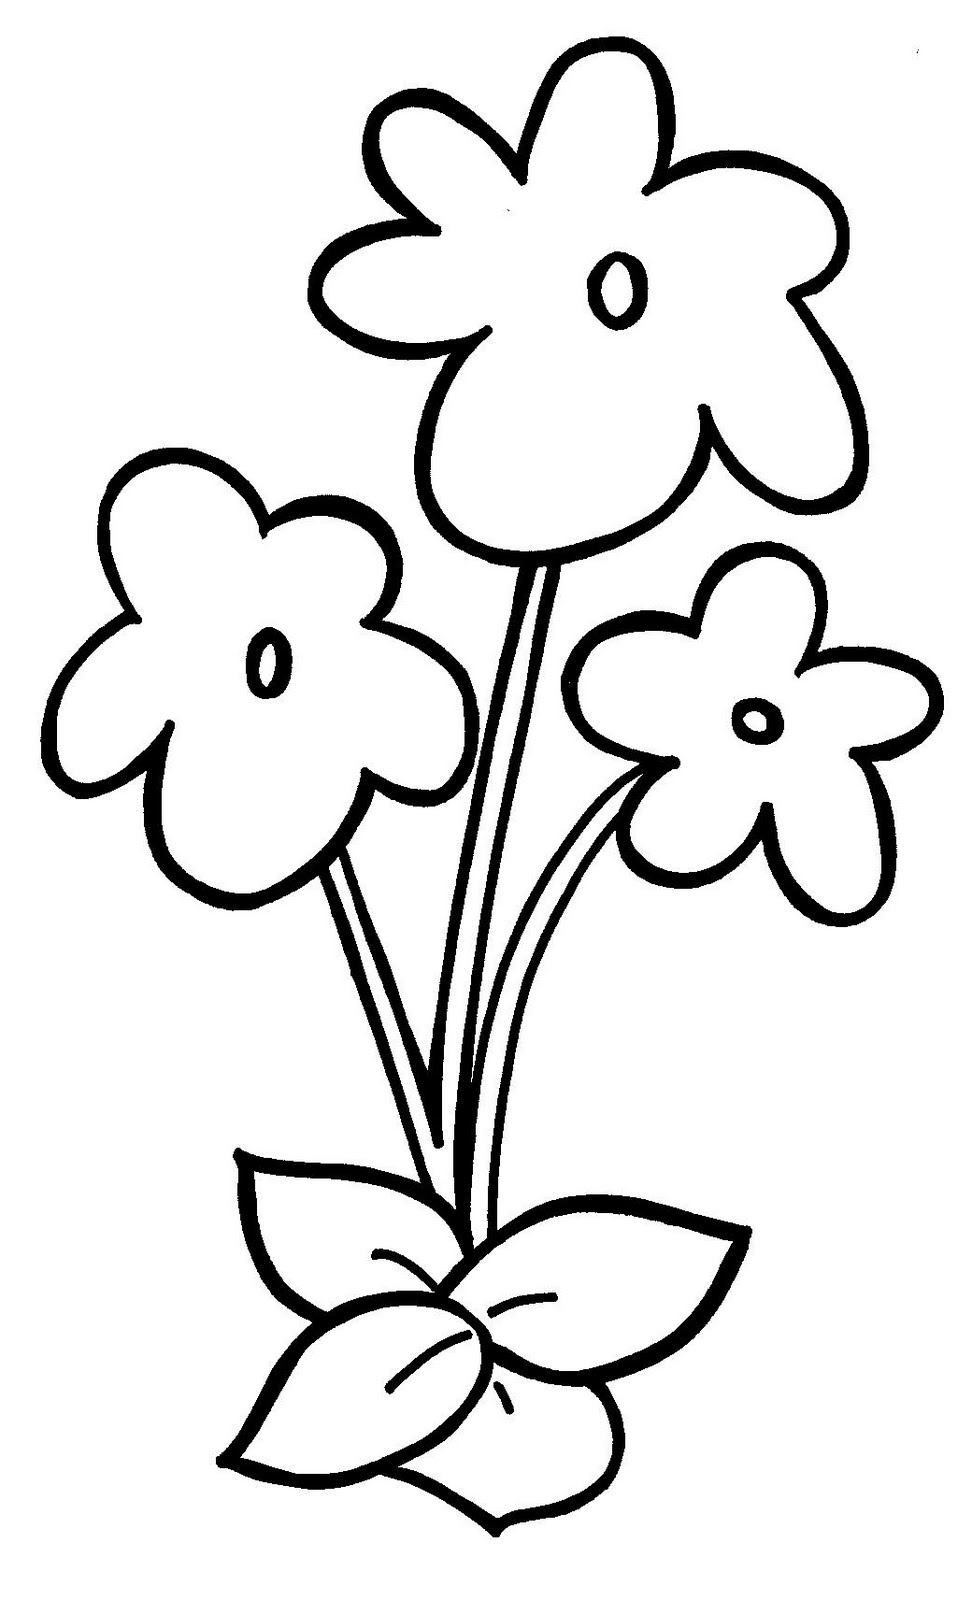 Violet Flower Coloring Page at Free printable